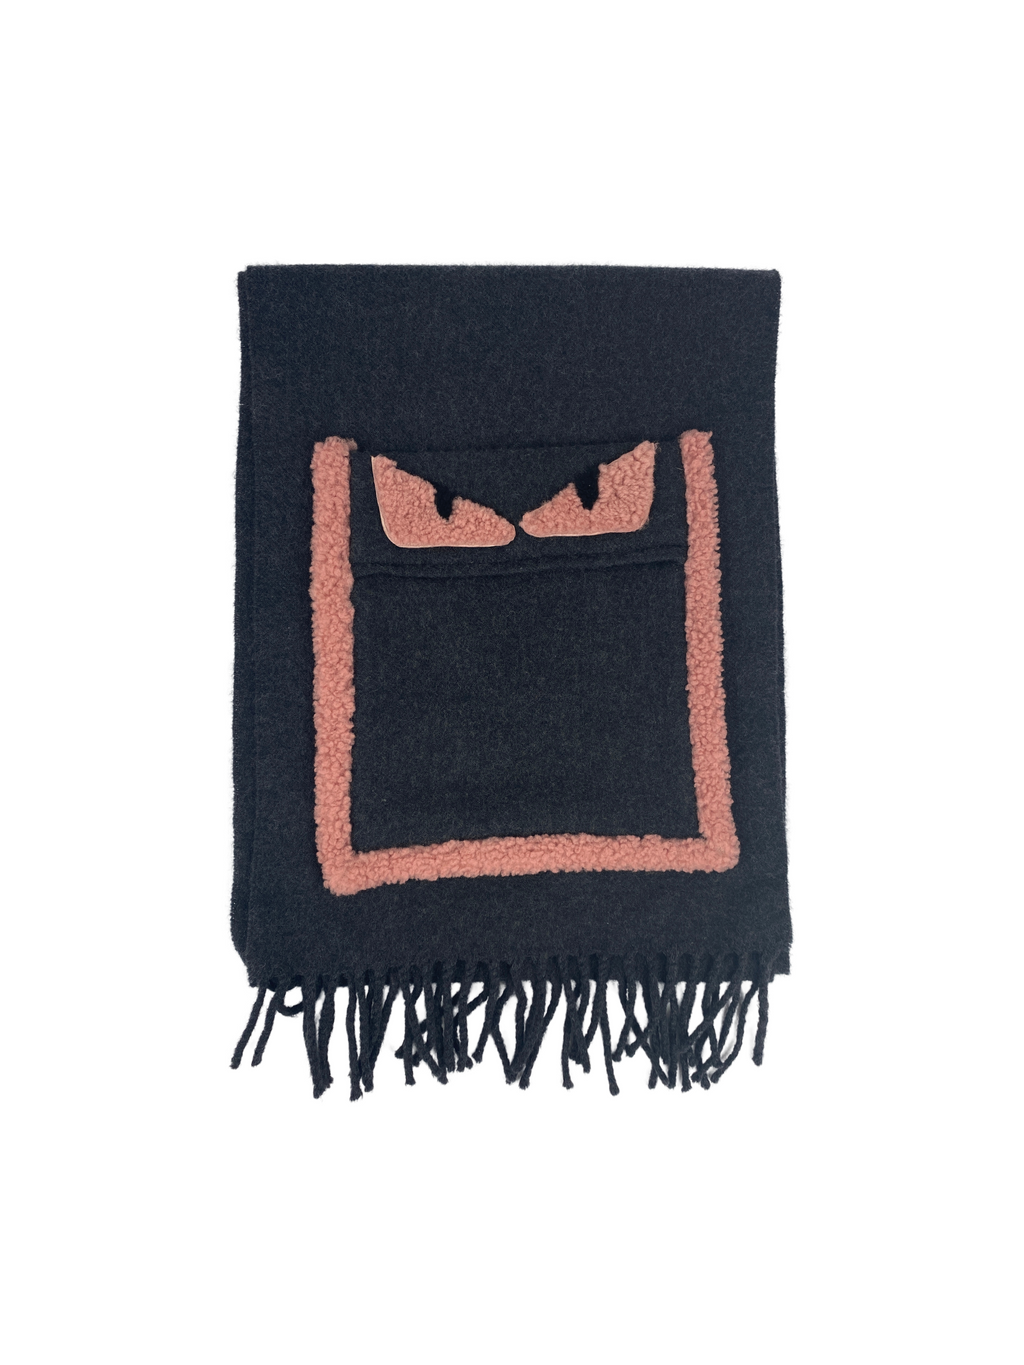 FENDI - CHARCOAL AND PINK SCARF WITH MONSTER POCKET DETAIL